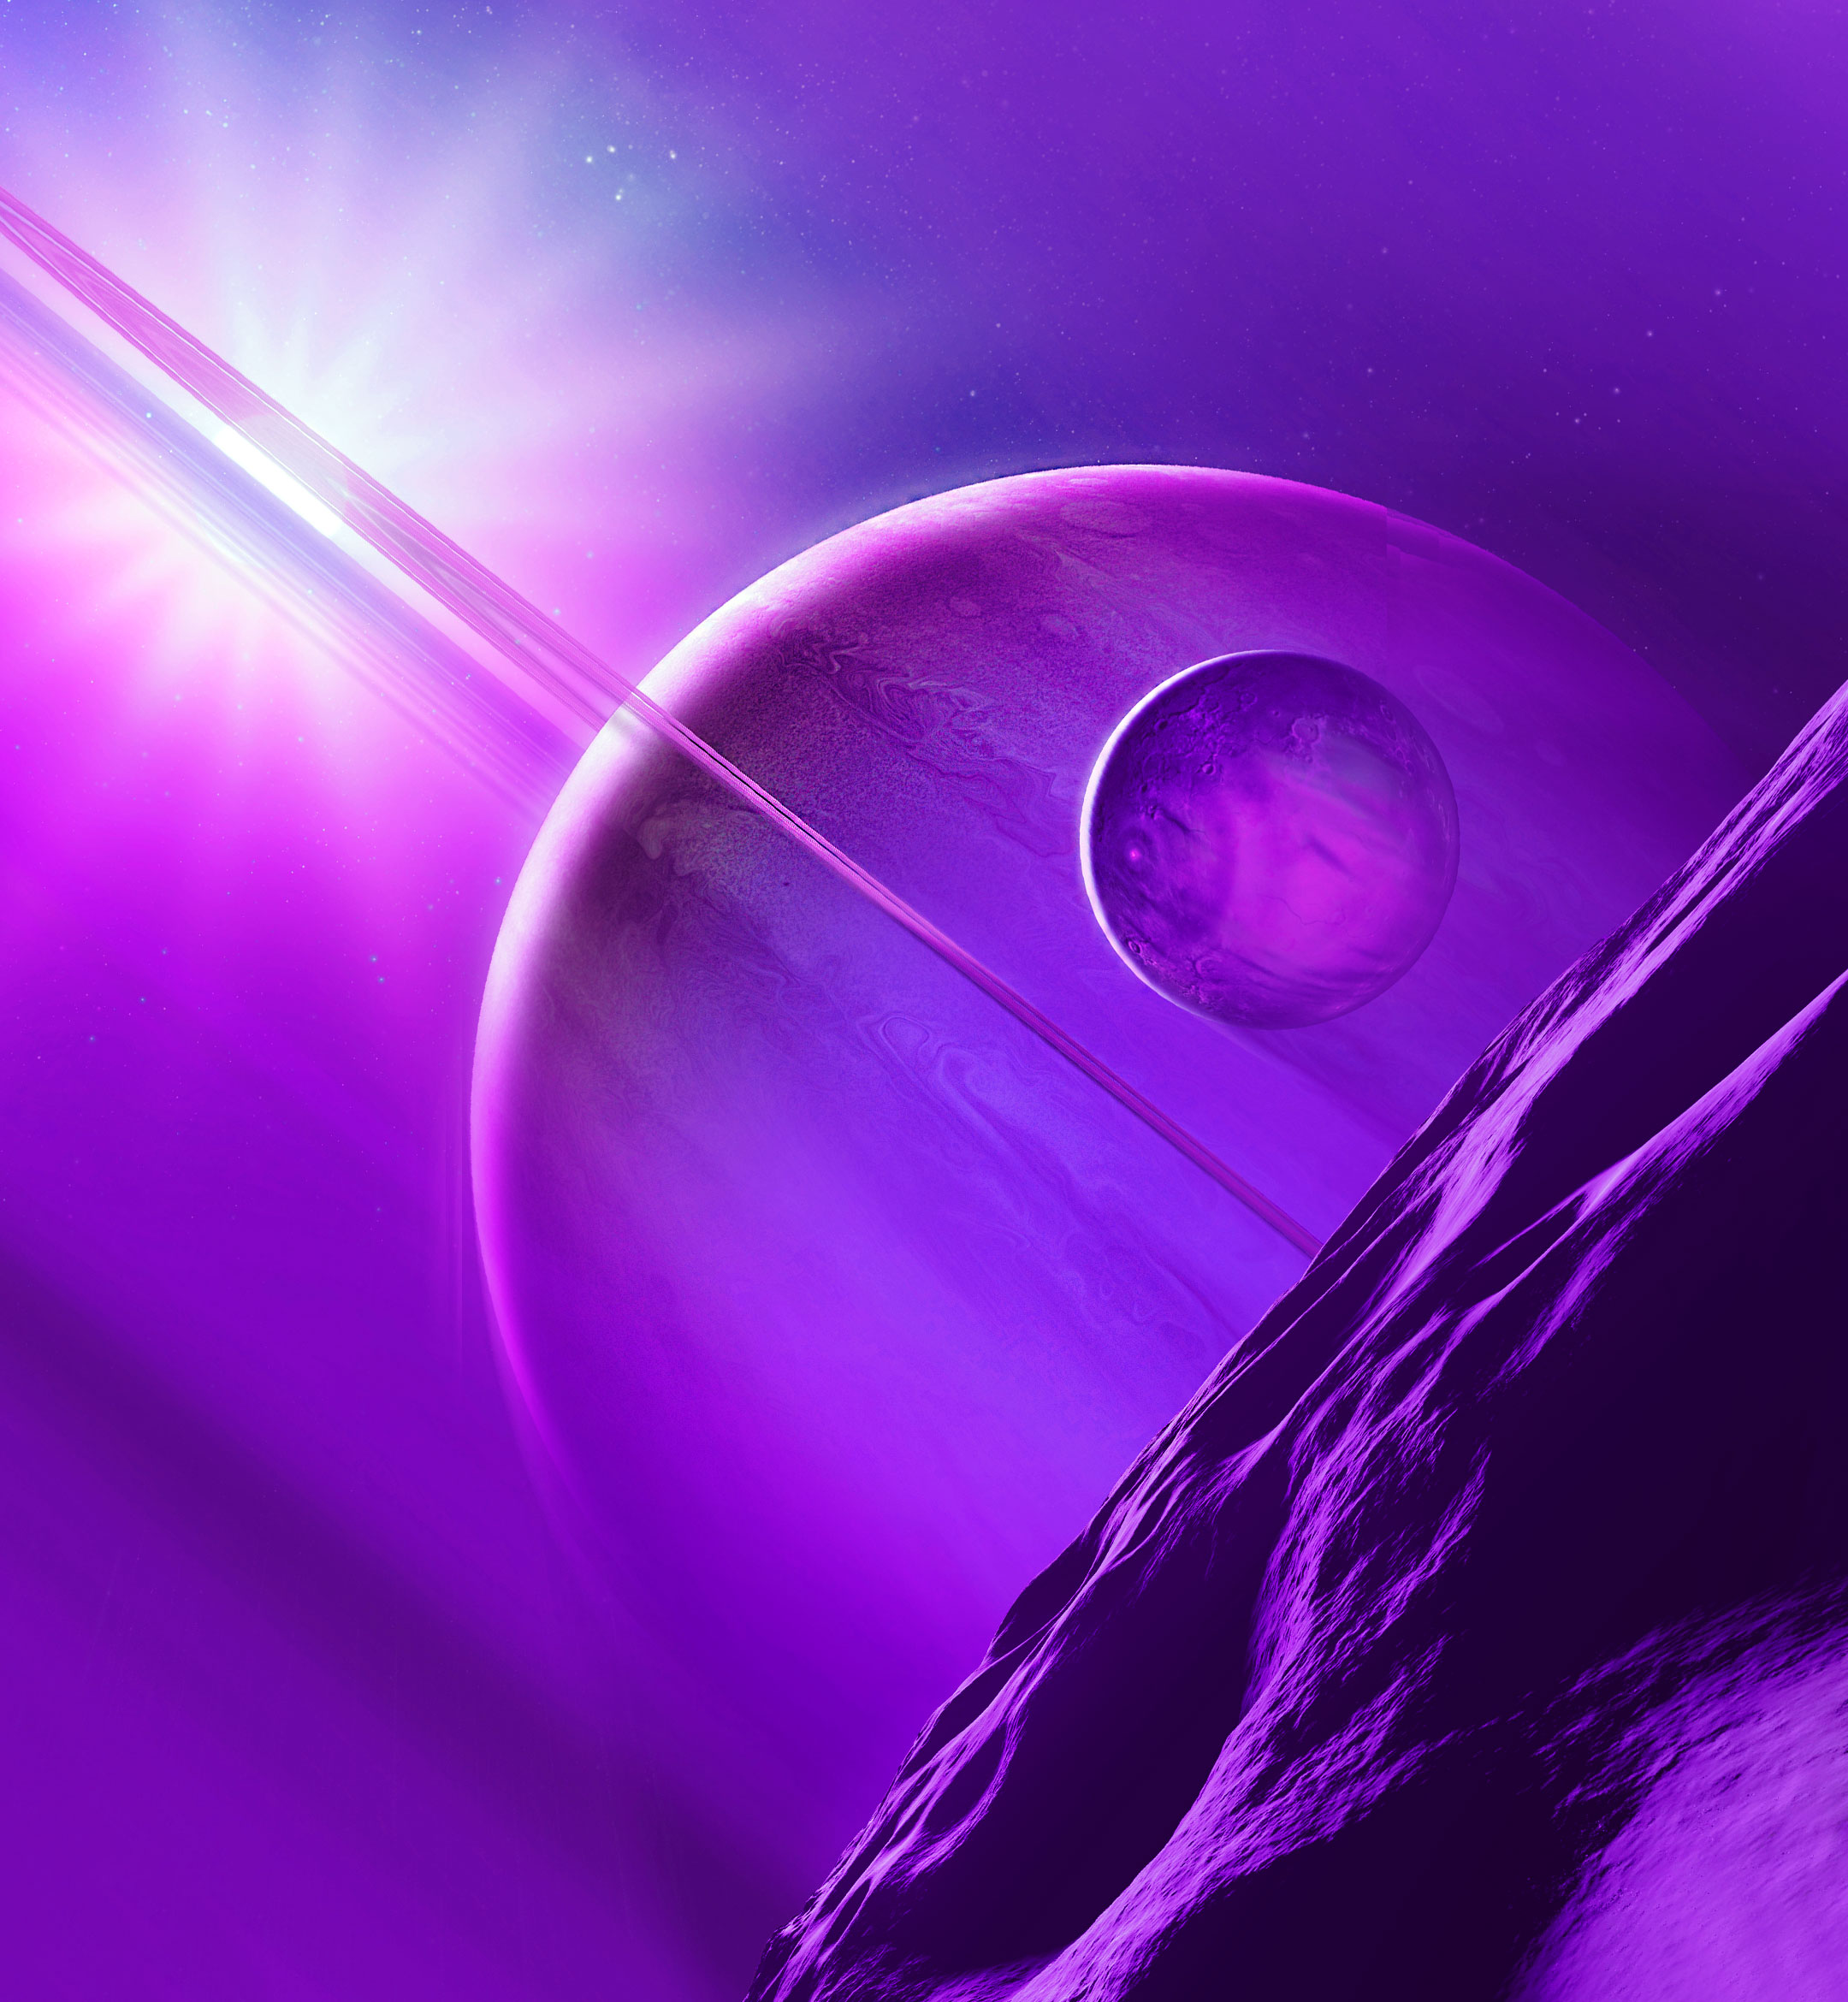 General 2160x2340 abstract space space art purple planet planetary rings digital art